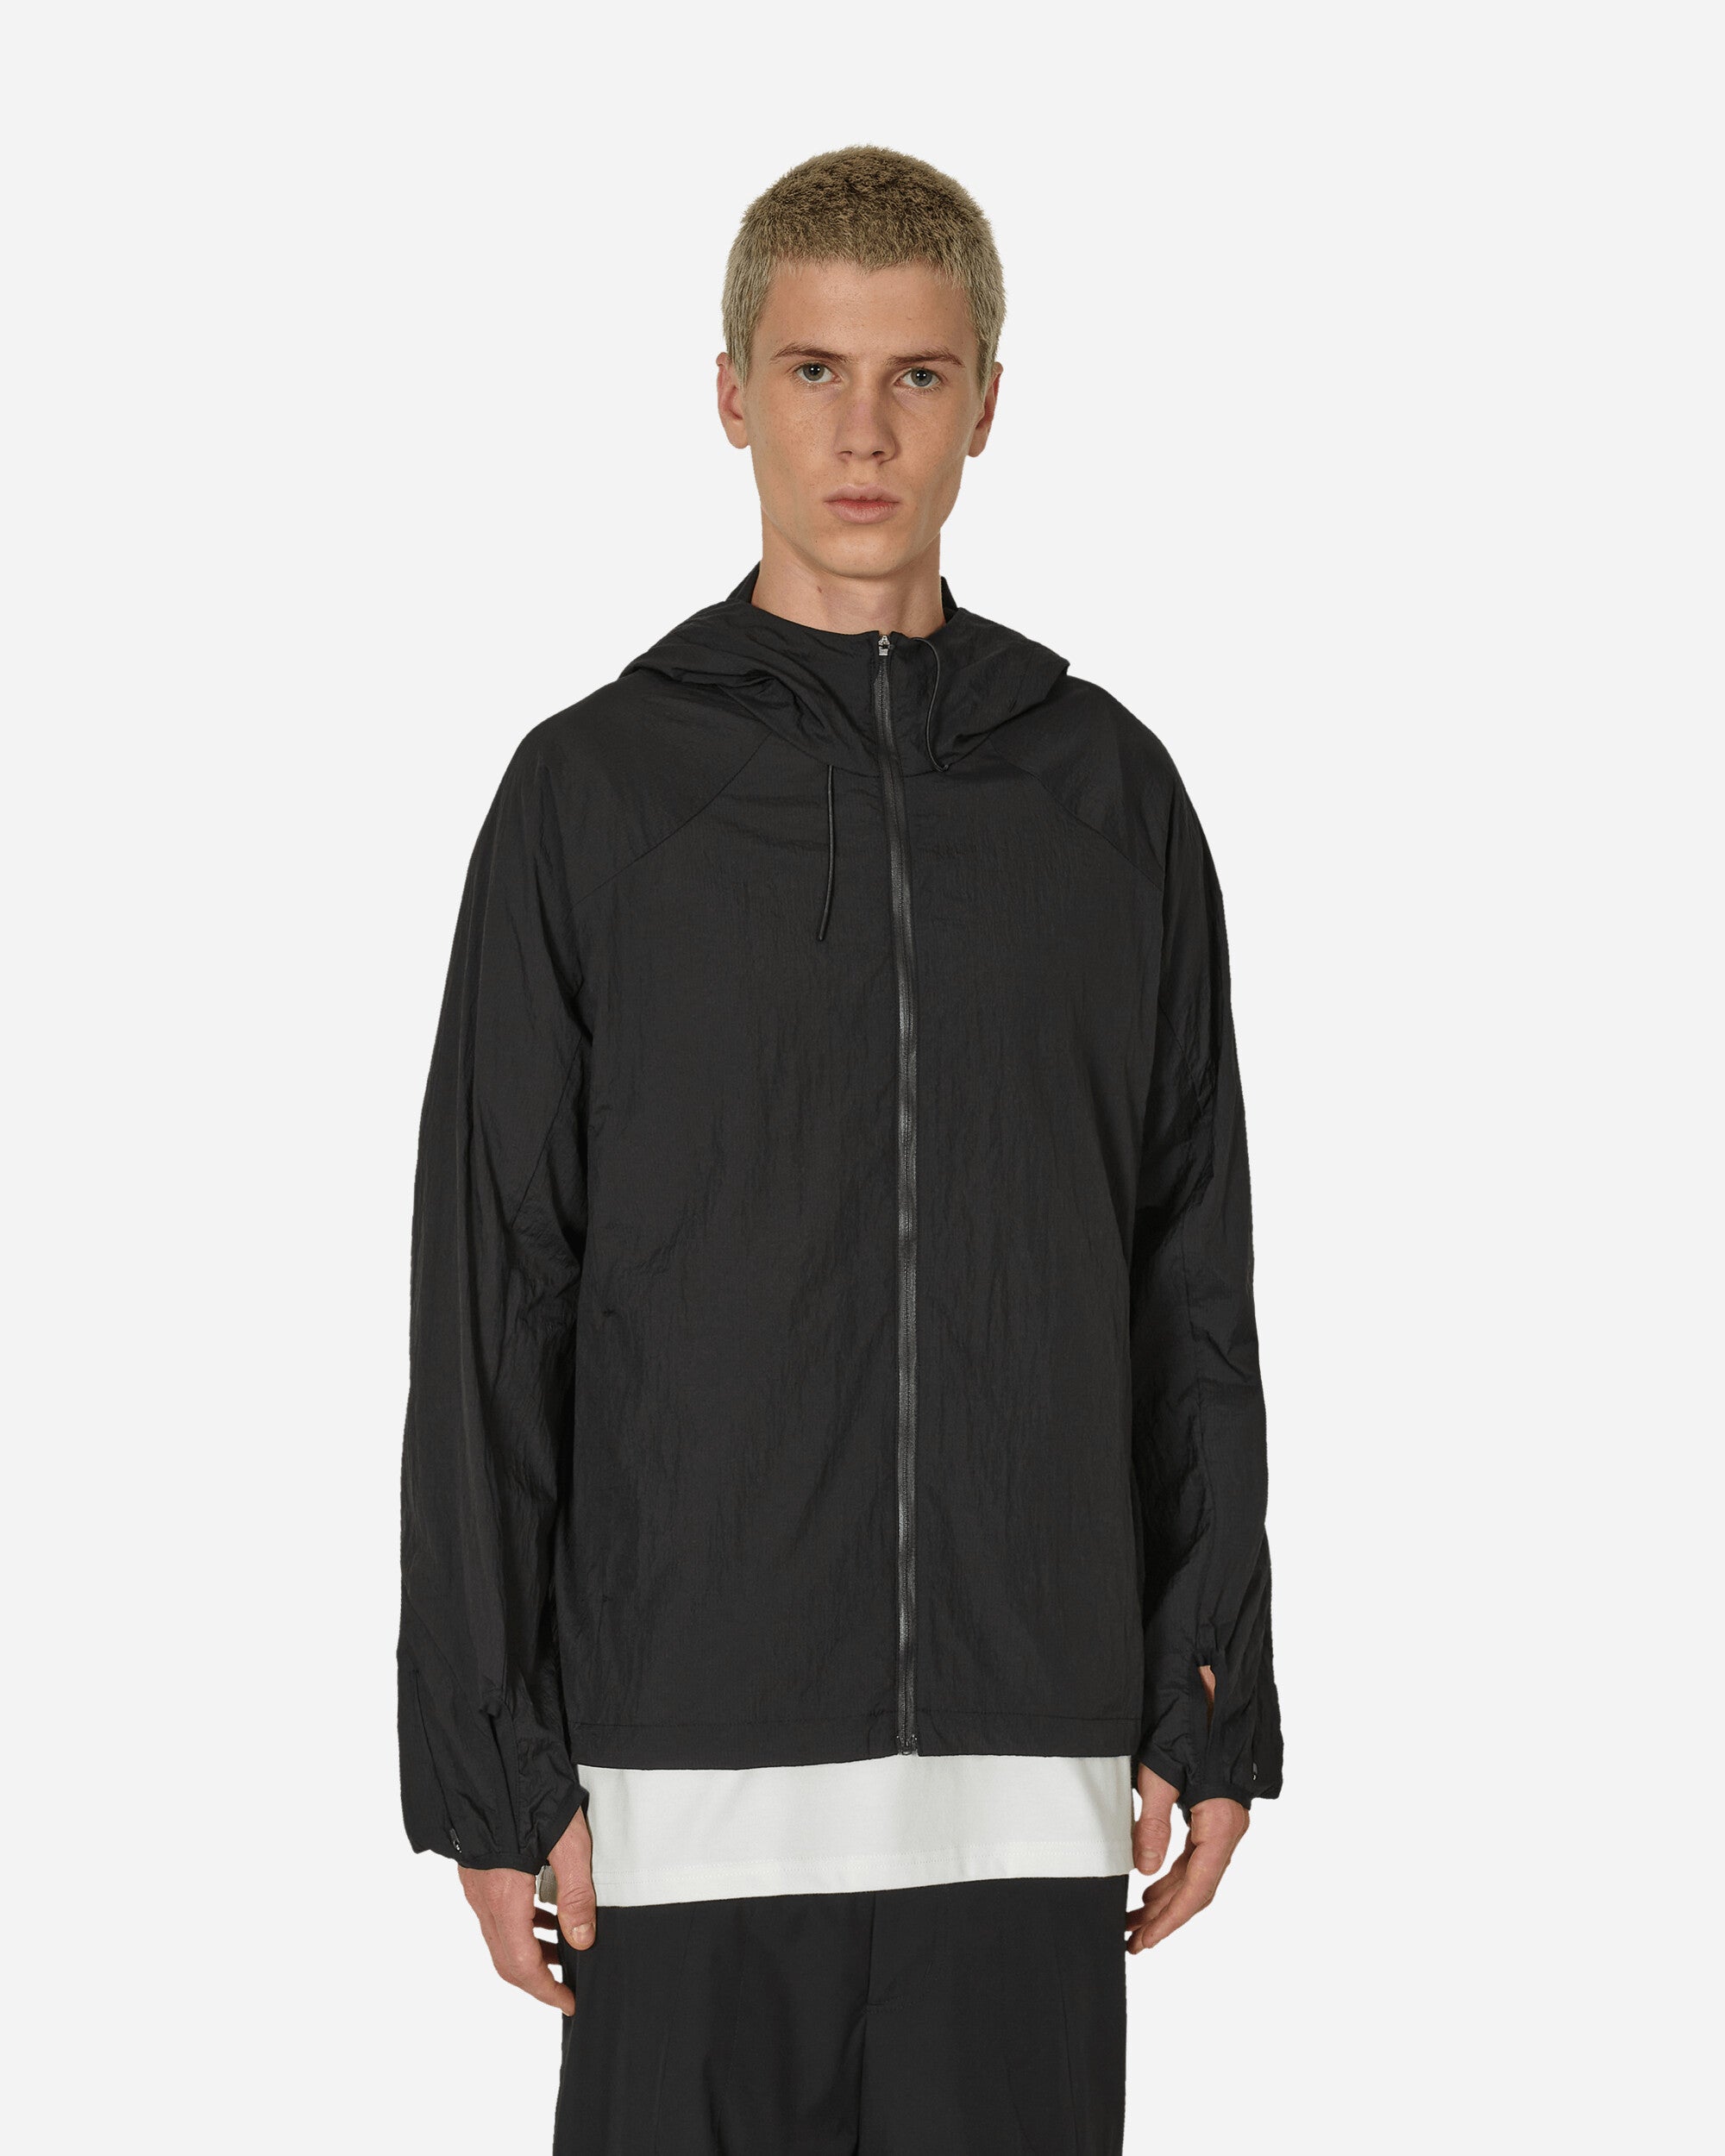 Post Archive Faction (PAF) 5.1 Technical Jacket (Right) Black